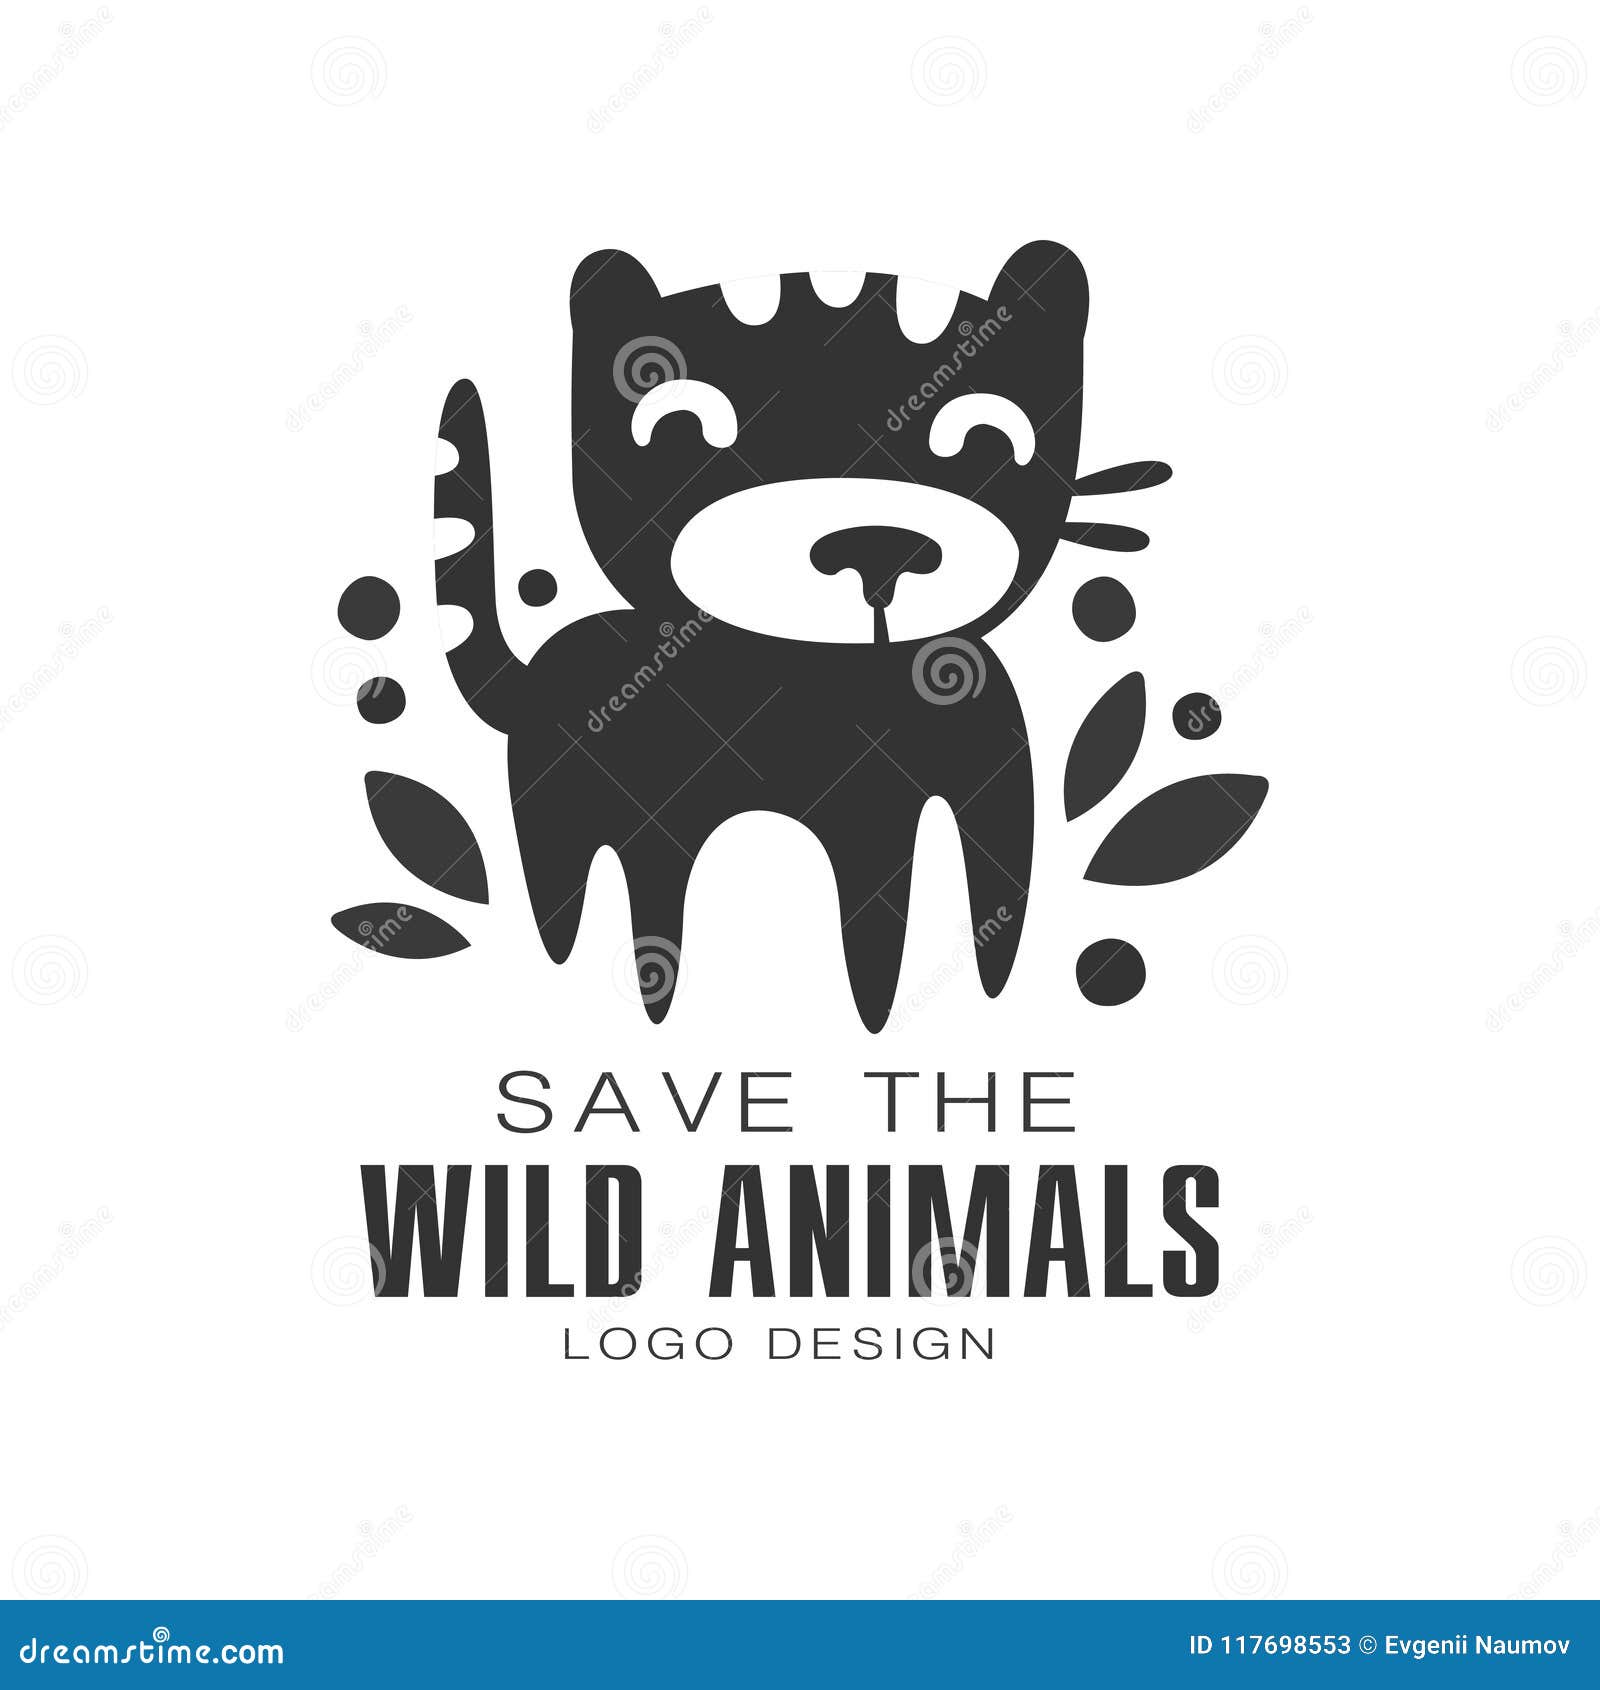 740,277 Wild Animals Logo Images, Stock Photos, 3D objects, & Vectors |  Shutterstock